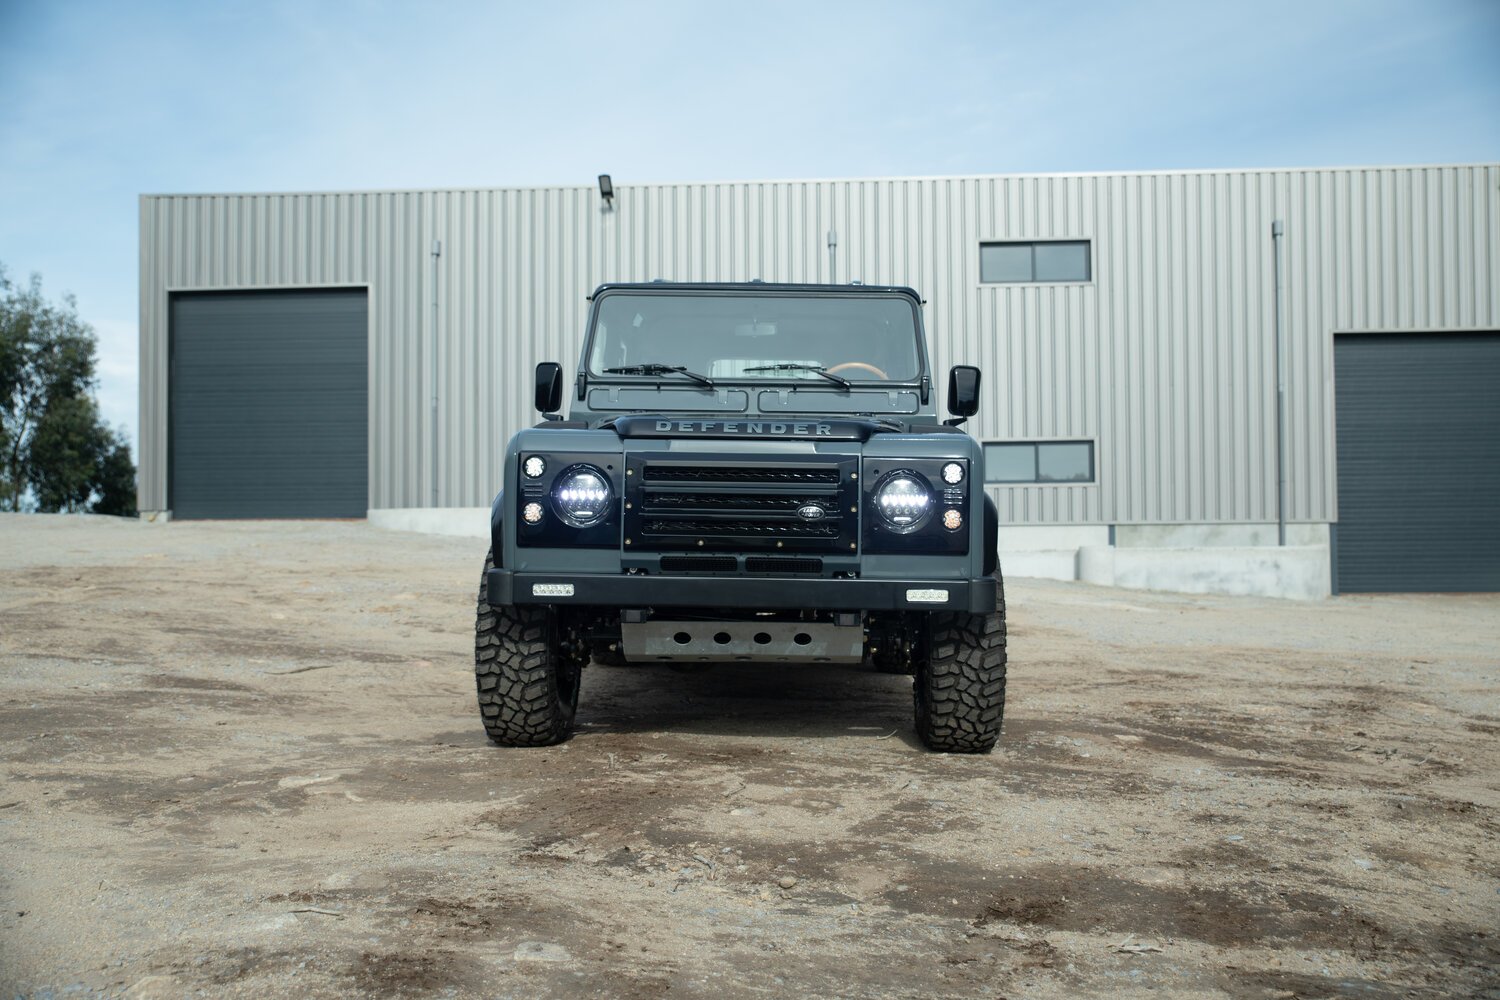 Witness our restored Defender 110, now equipped with a roaring V8 engine. Ready to conquer any terrain with unmatched strength.

#landrover #defender #d110 #defender110 #landroverdefender #4x4 #overland